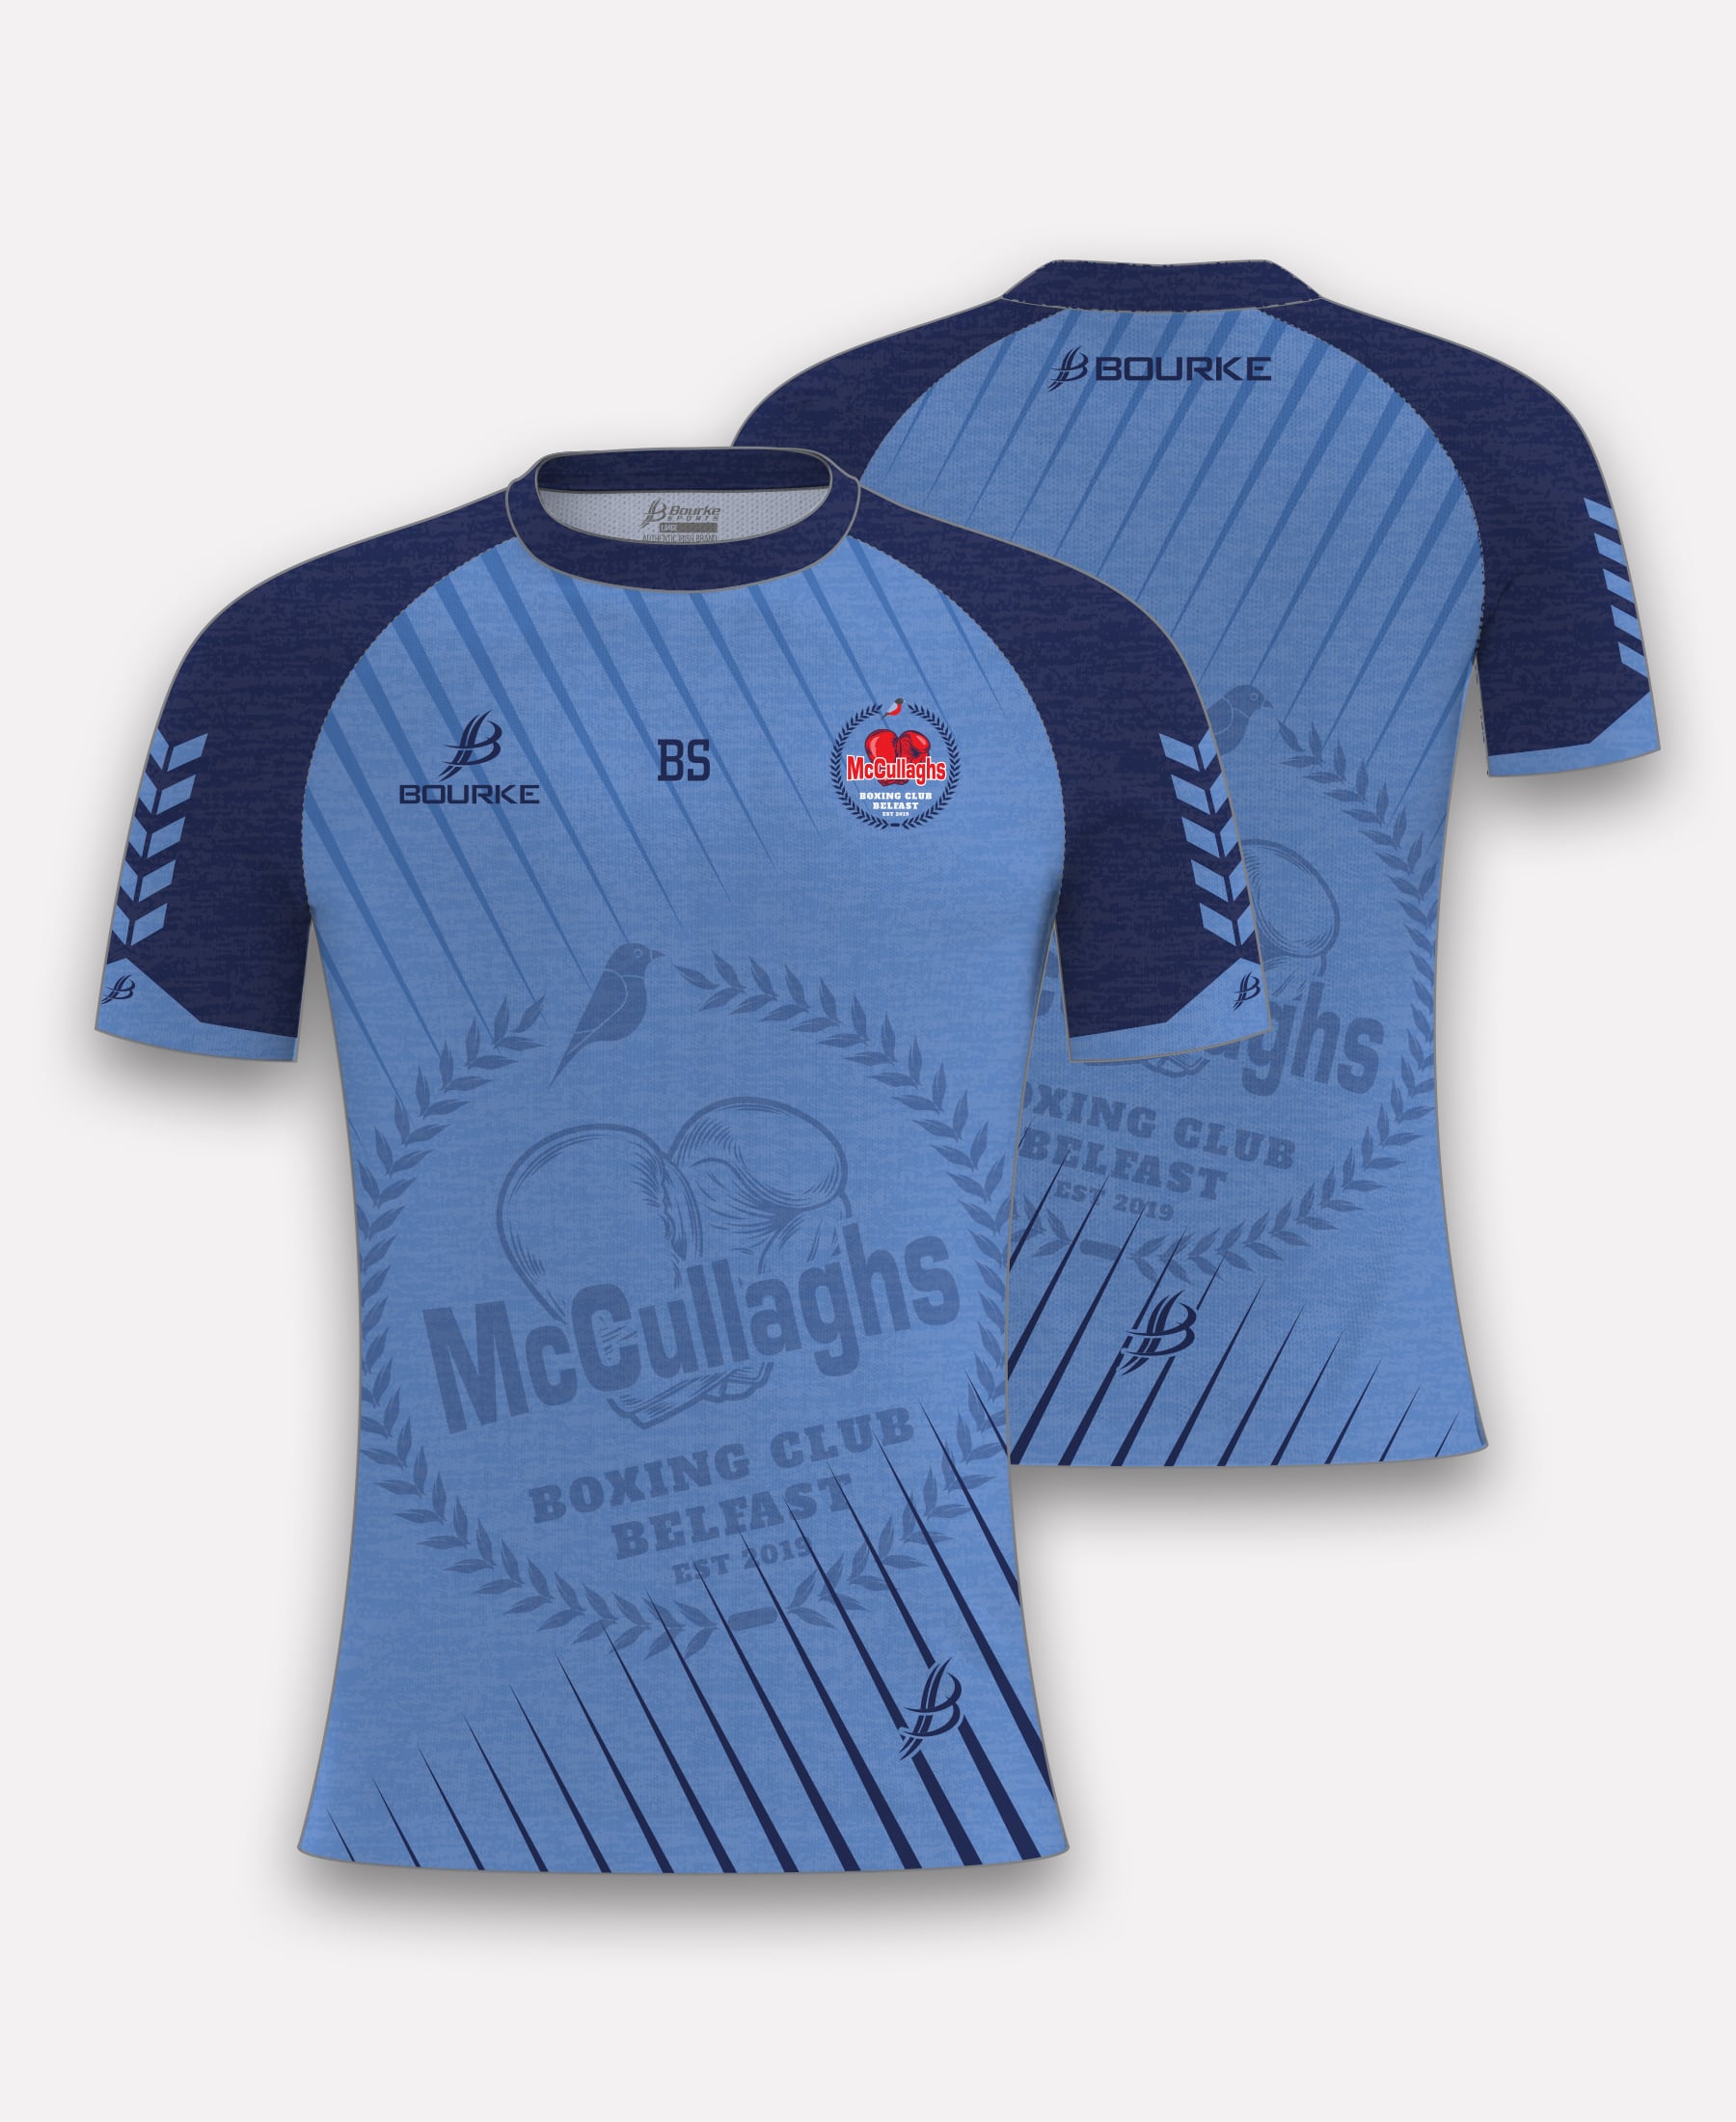 McCullagh Boxing Club Jersey